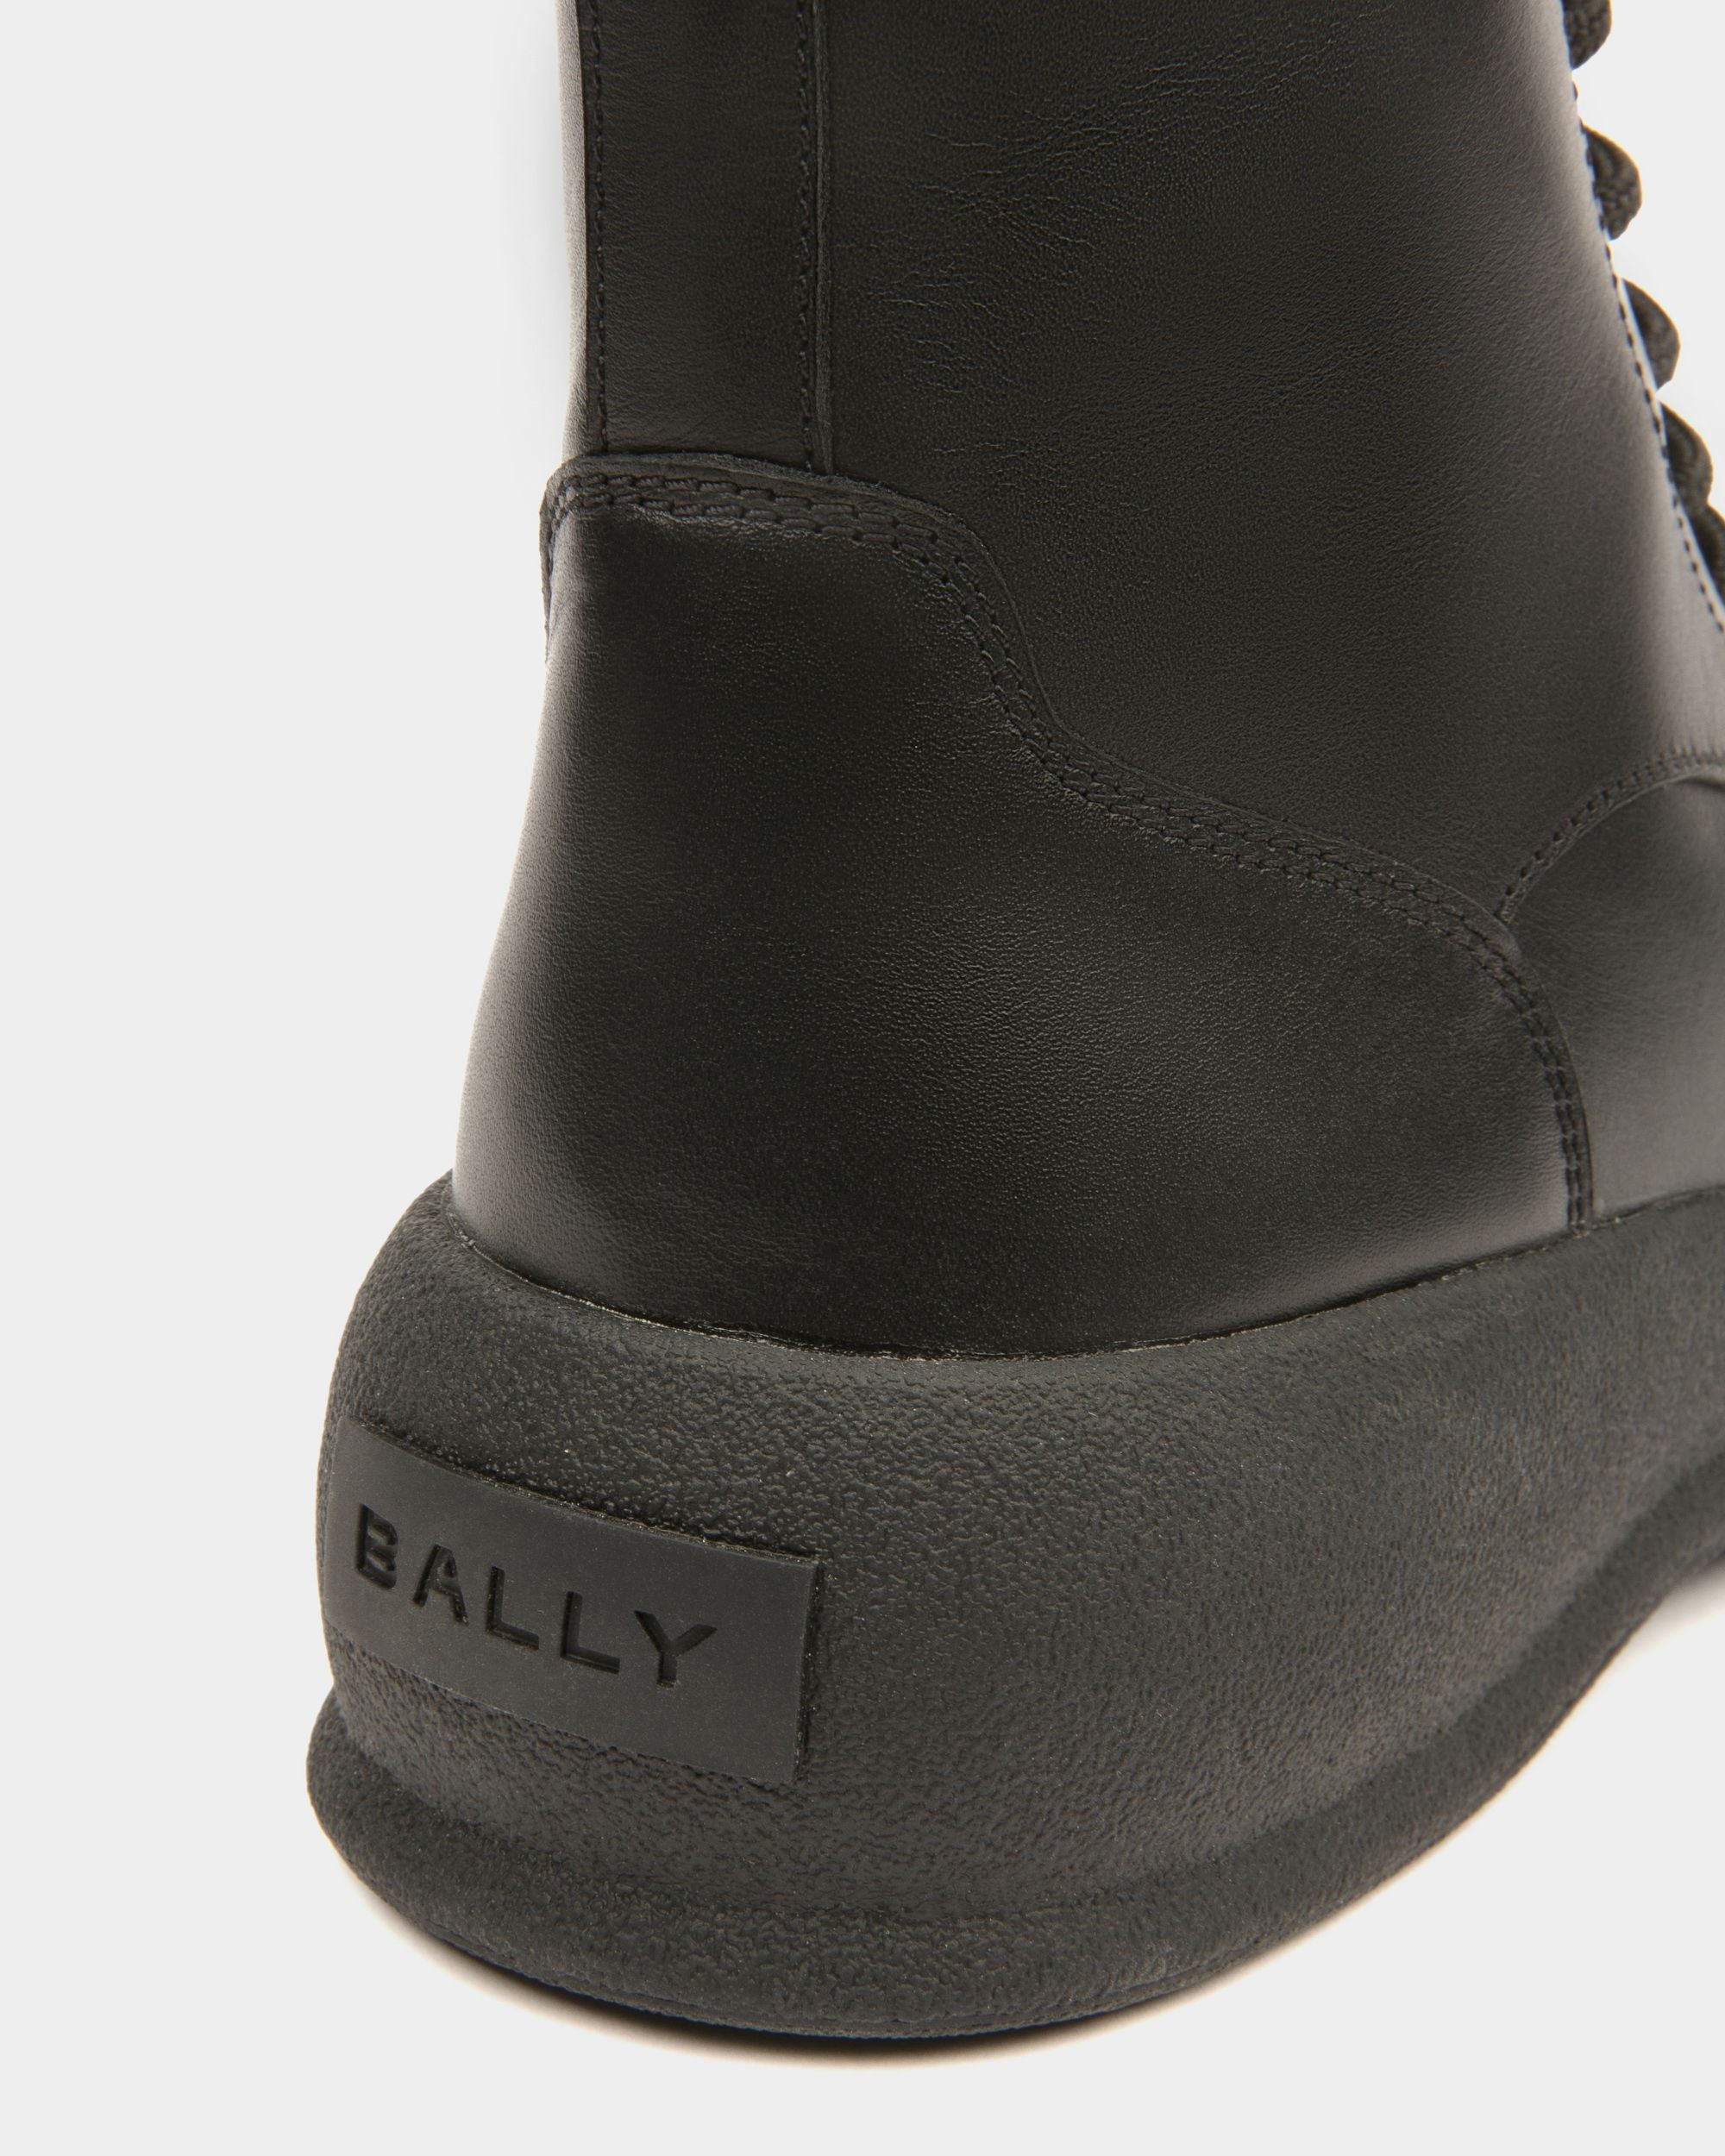 Celsyo | Women's Booties | Black Leather | Bally | Still Life Detail